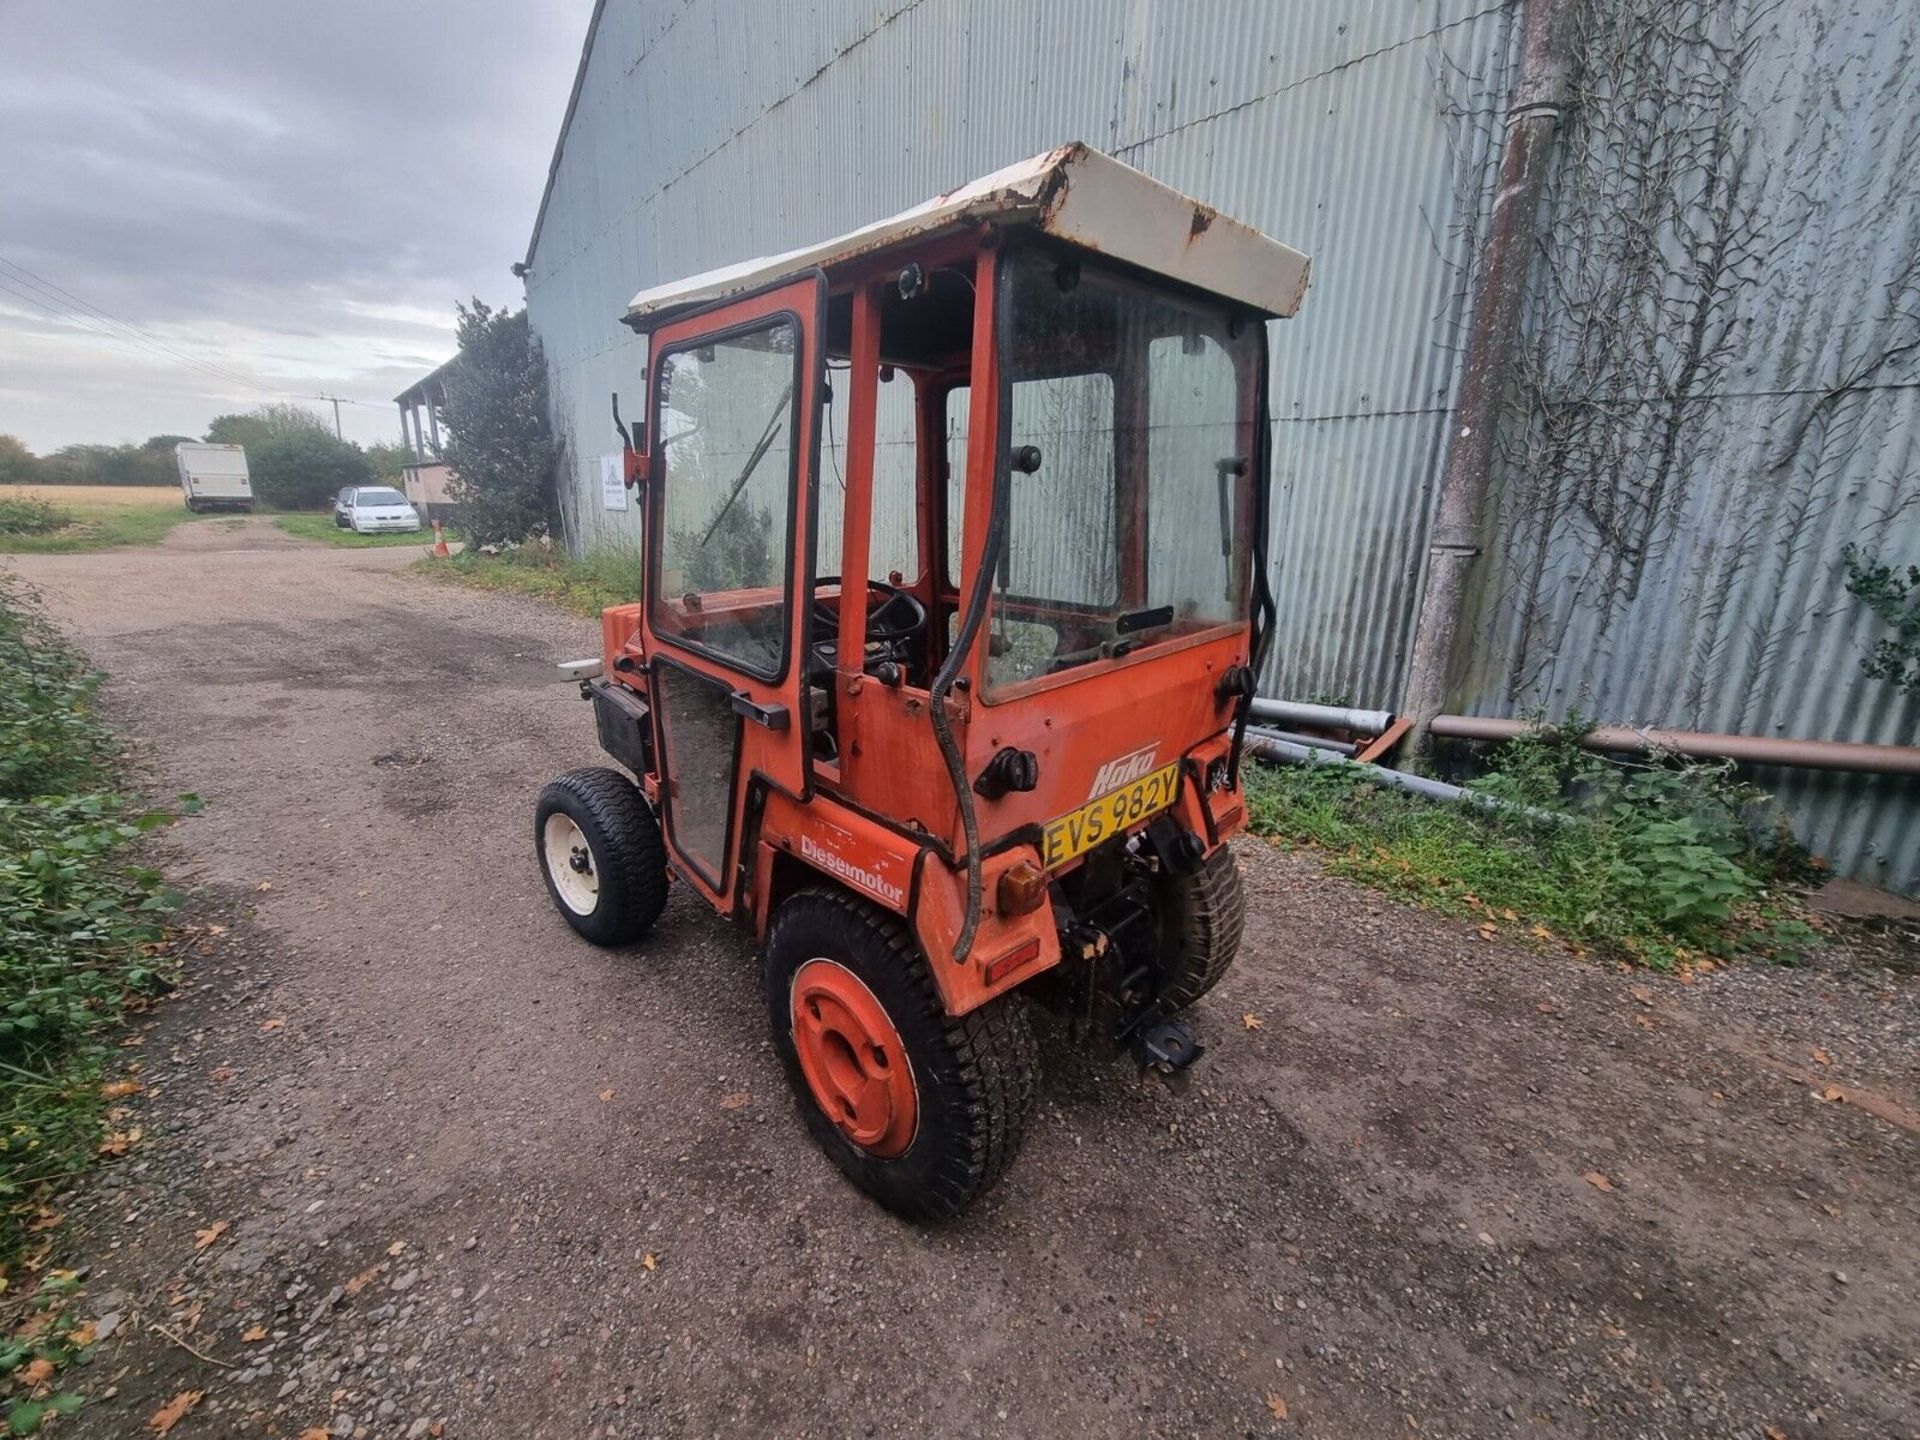 1987 HAKO TRACTOR 2WD - Image 6 of 6